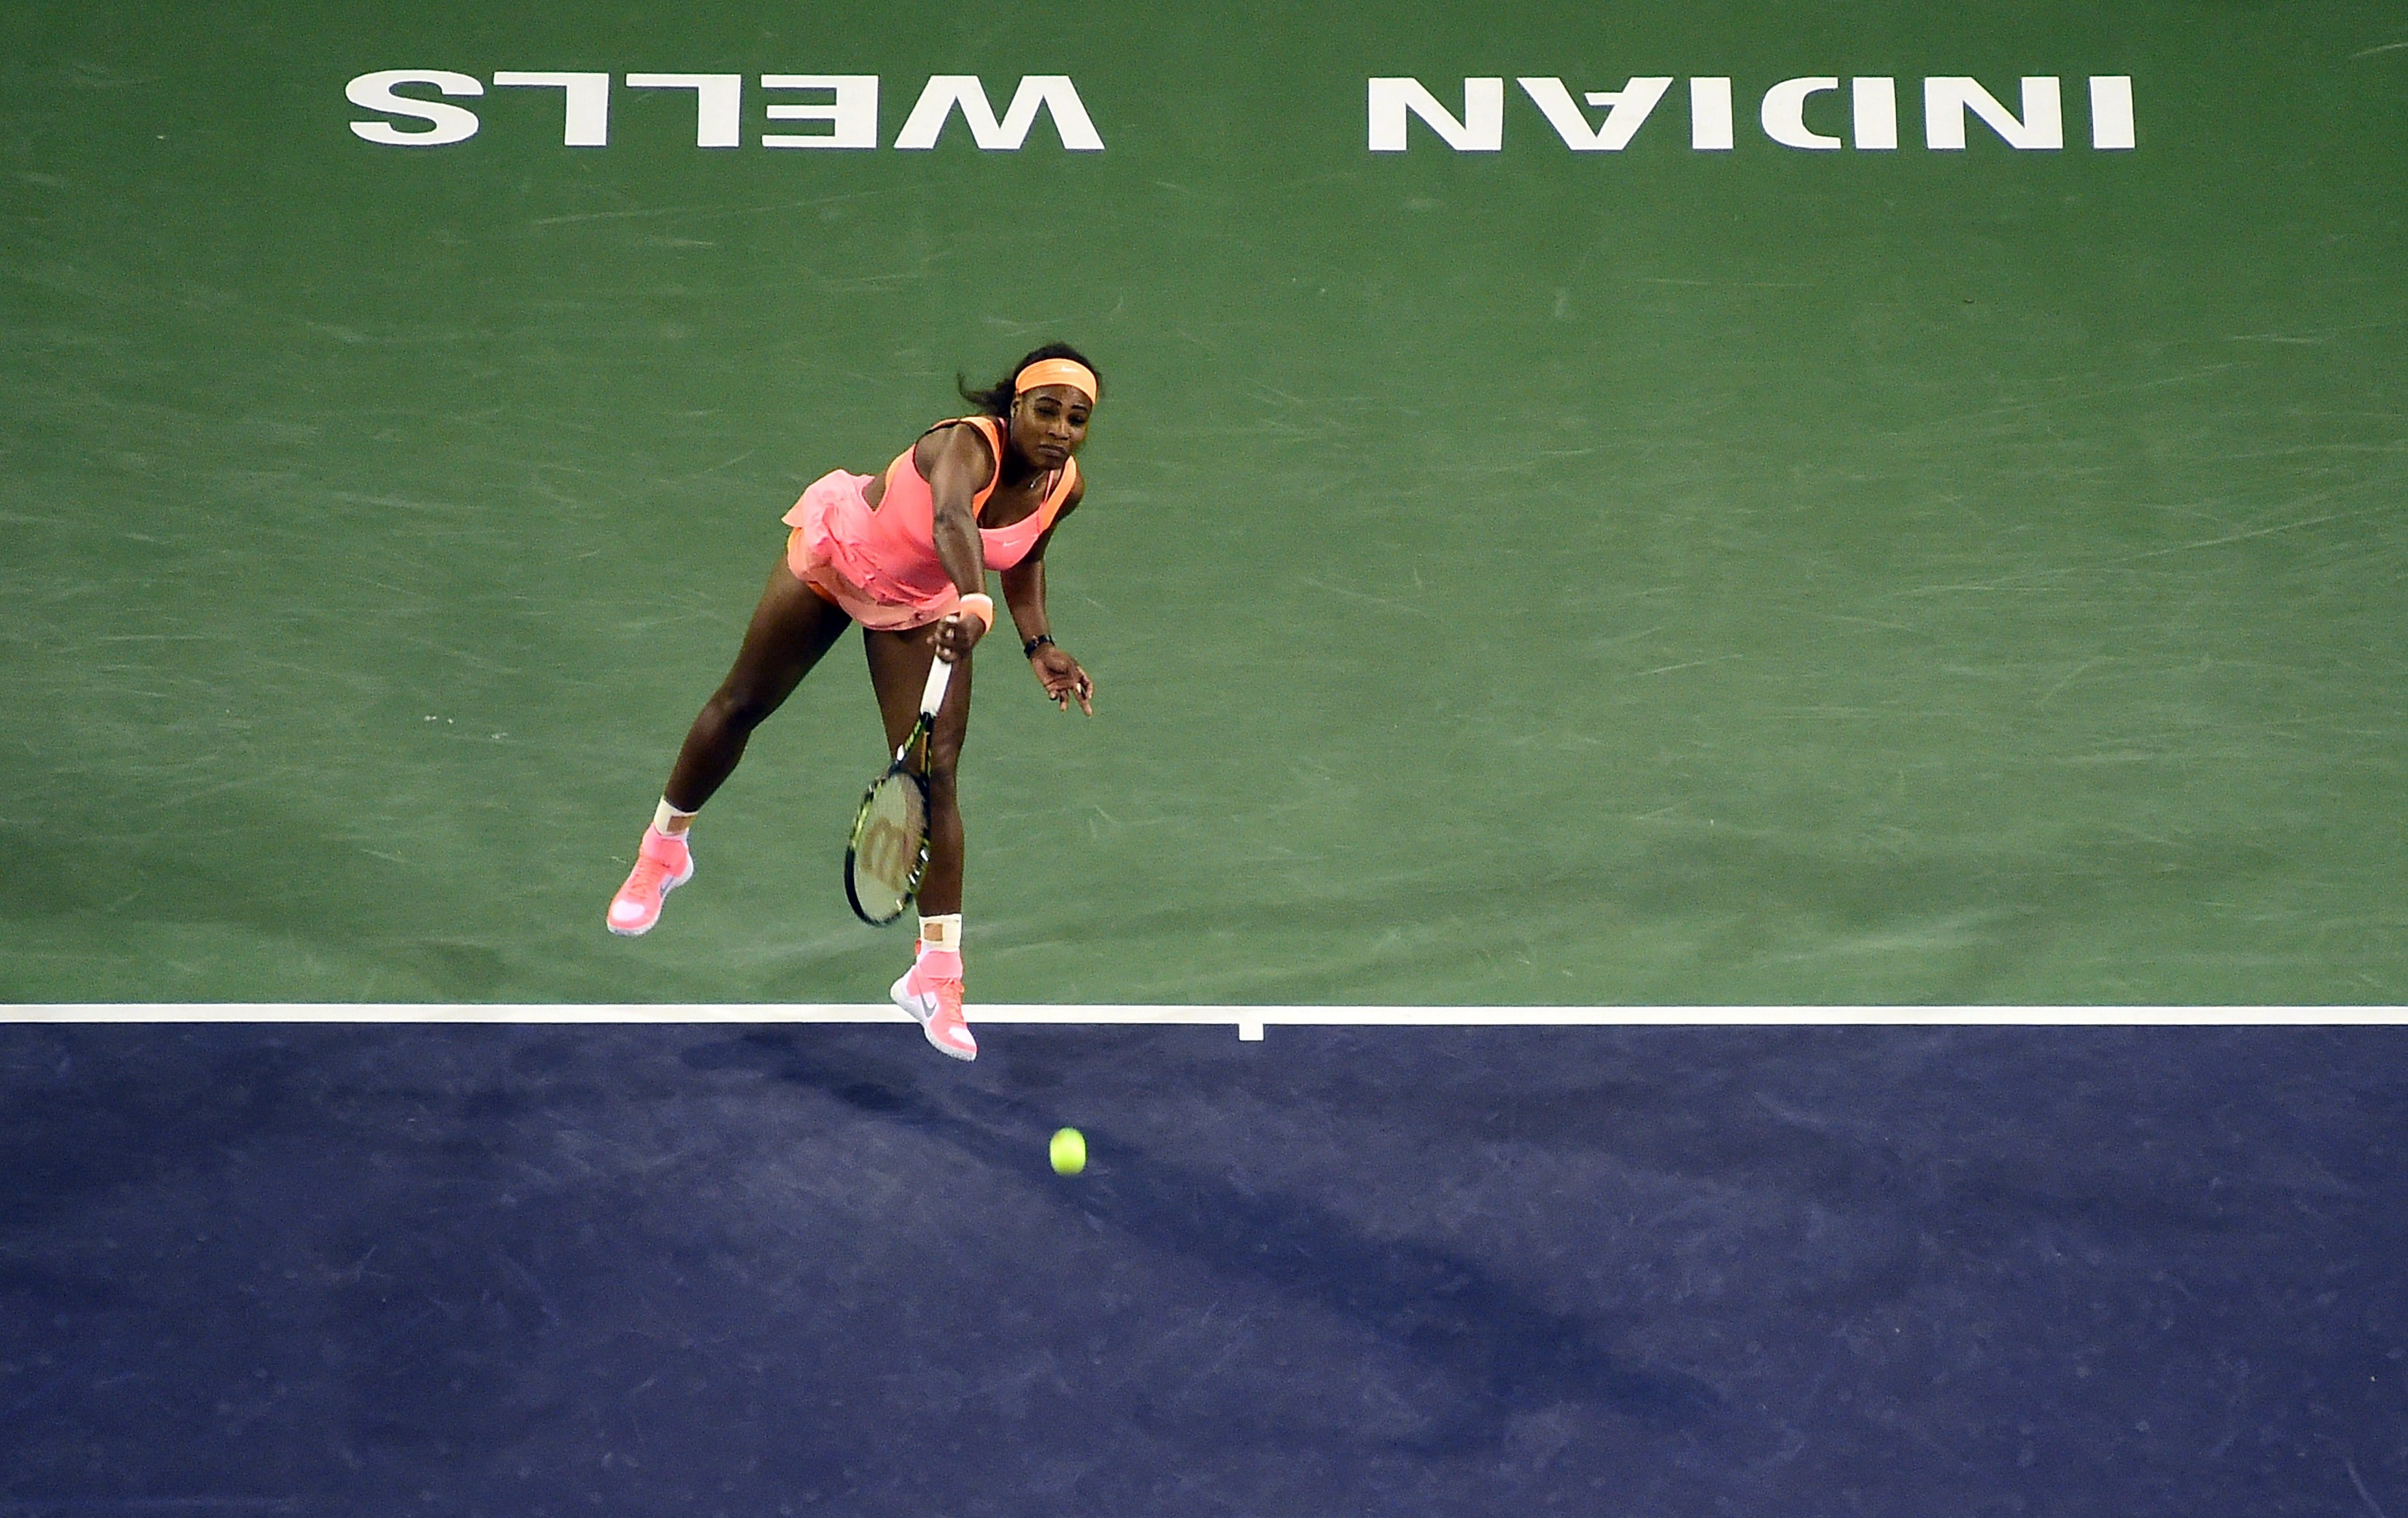 15 reasons Serena Williams is the greatest 